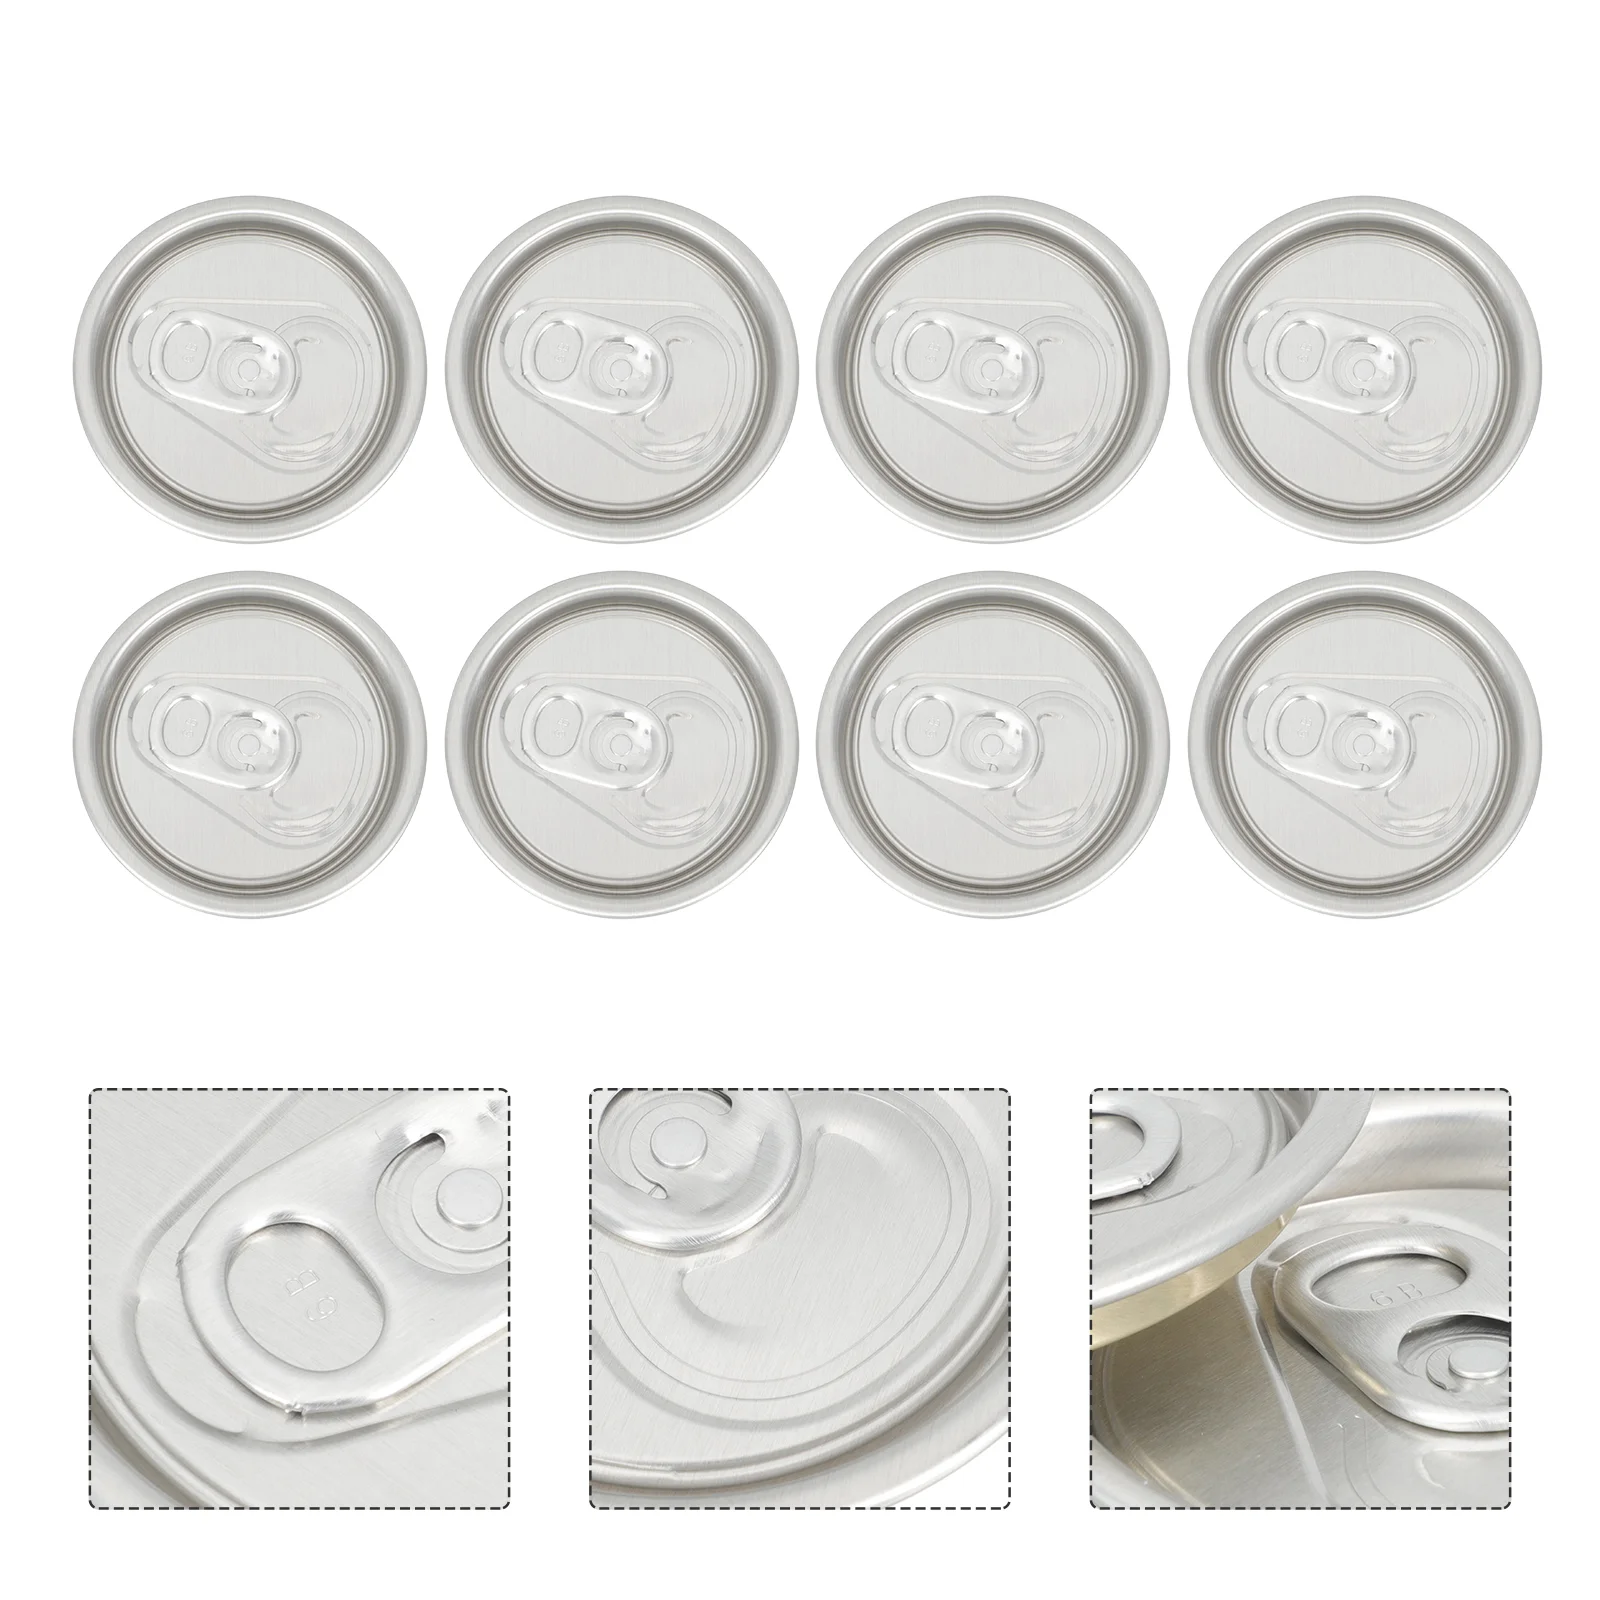 

Can Lids Soda Covers Beer Jar Beverage Cover Lid Wide Mouth Saver Drink Mason Aluminum Canning Easy Pet Opener Cap Cola Led Caps